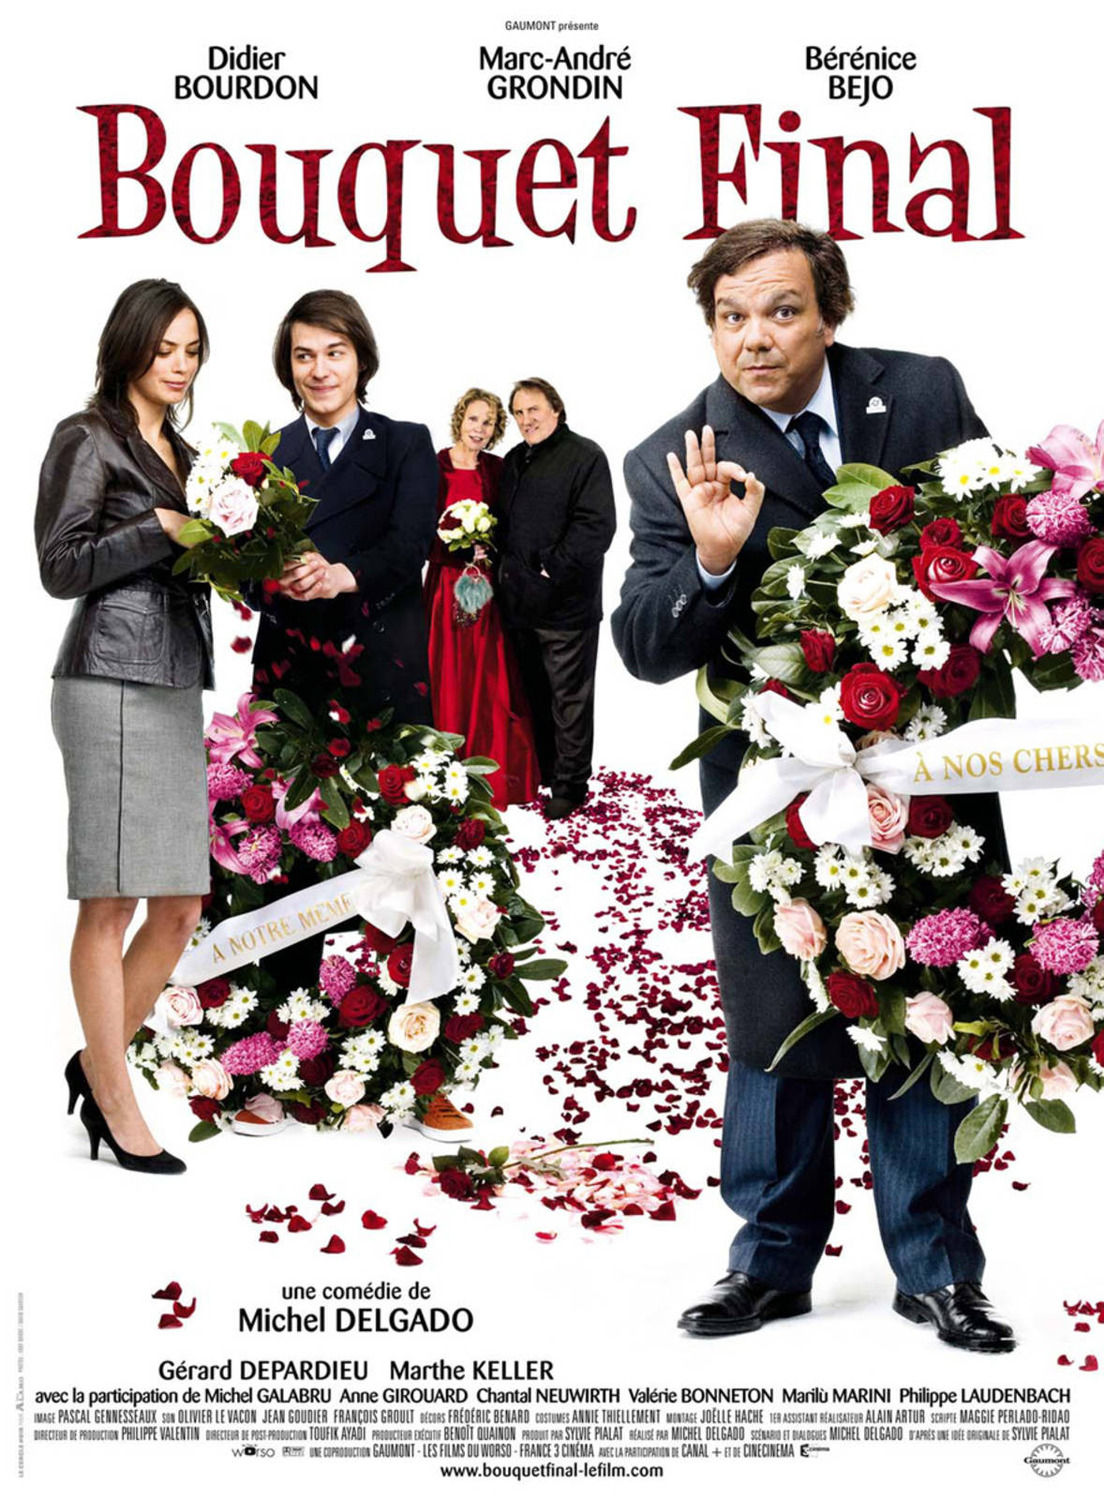 Extra Large Movie Poster Image for Bouquet final 